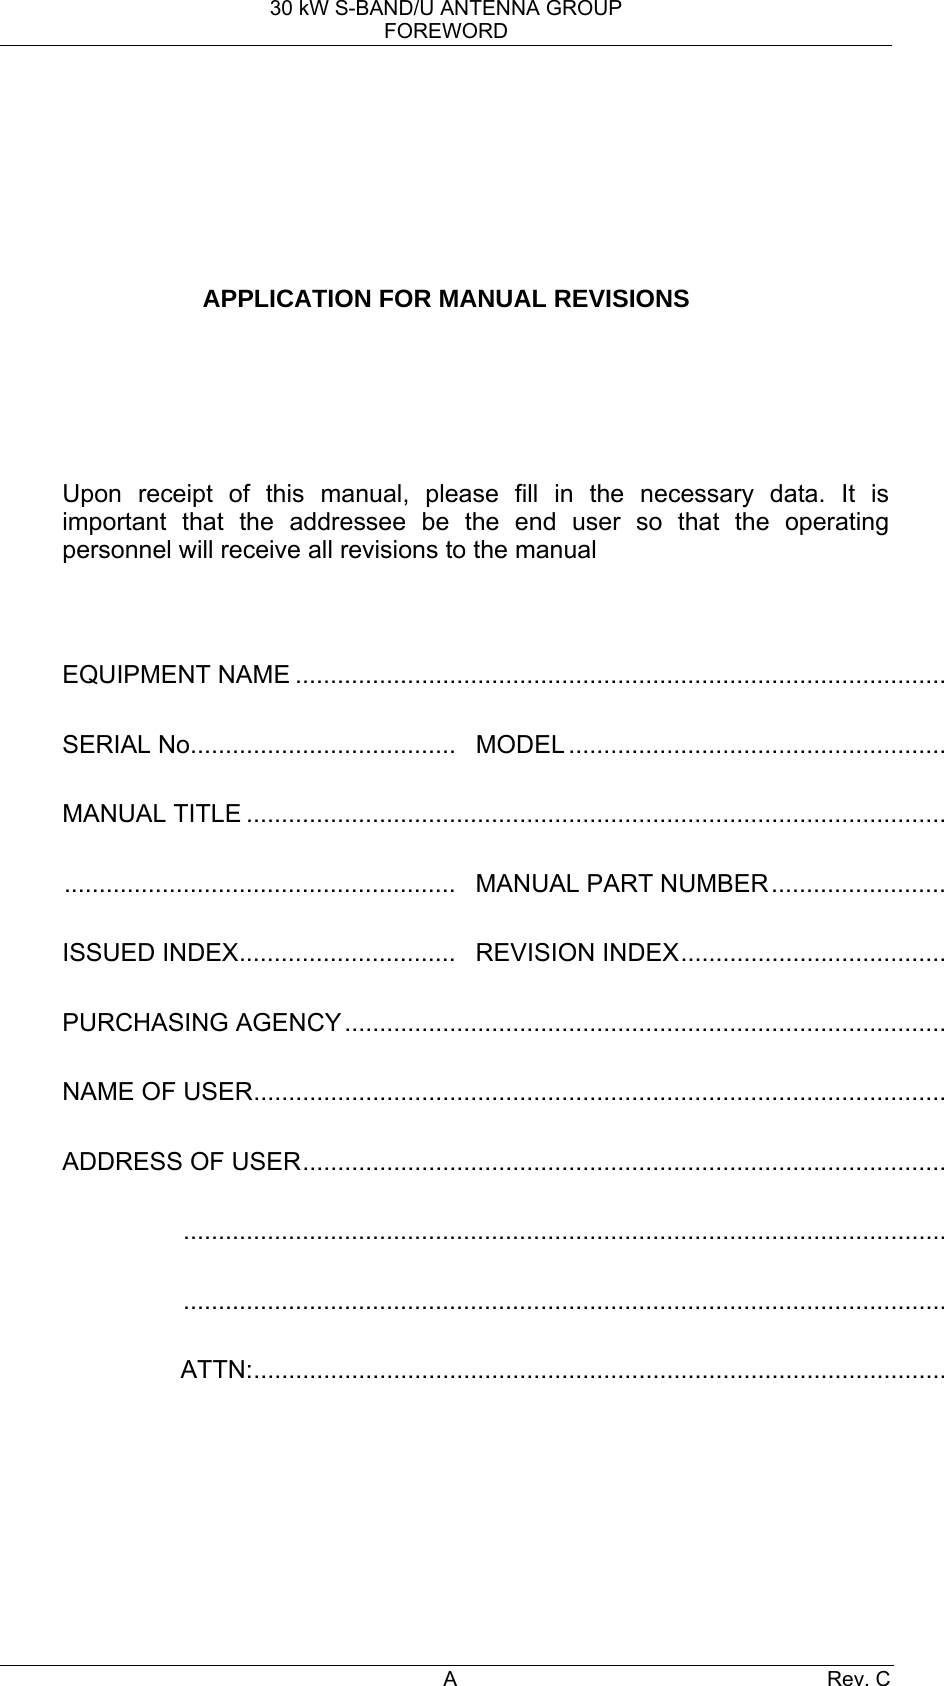 30 kW S-BAND/U ANTENNA GROUP FOREWORD A Rev. C        APPLICATION FOR MANUAL REVISIONS       Upon receipt of this manual, please fill in the necessary data. It is important that the addressee be the end user so that the operating personnel will receive all revisions to the manual   EQUIPMENT NAME ............................................................................................. SERIAL No......................................  MODEL ...................................................... MANUAL TITLE .................................................................................................... ........................................................  MANUAL PART NUMBER......................... ISSUED INDEX...............................  REVISION INDEX...................................... PURCHASING AGENCY...................................................................................... NAME OF USER................................................................................................... ADDRESS OF USER............................................................................................ ............................................................................................................. ............................................................................................................. ATTN:...................................................................................................    